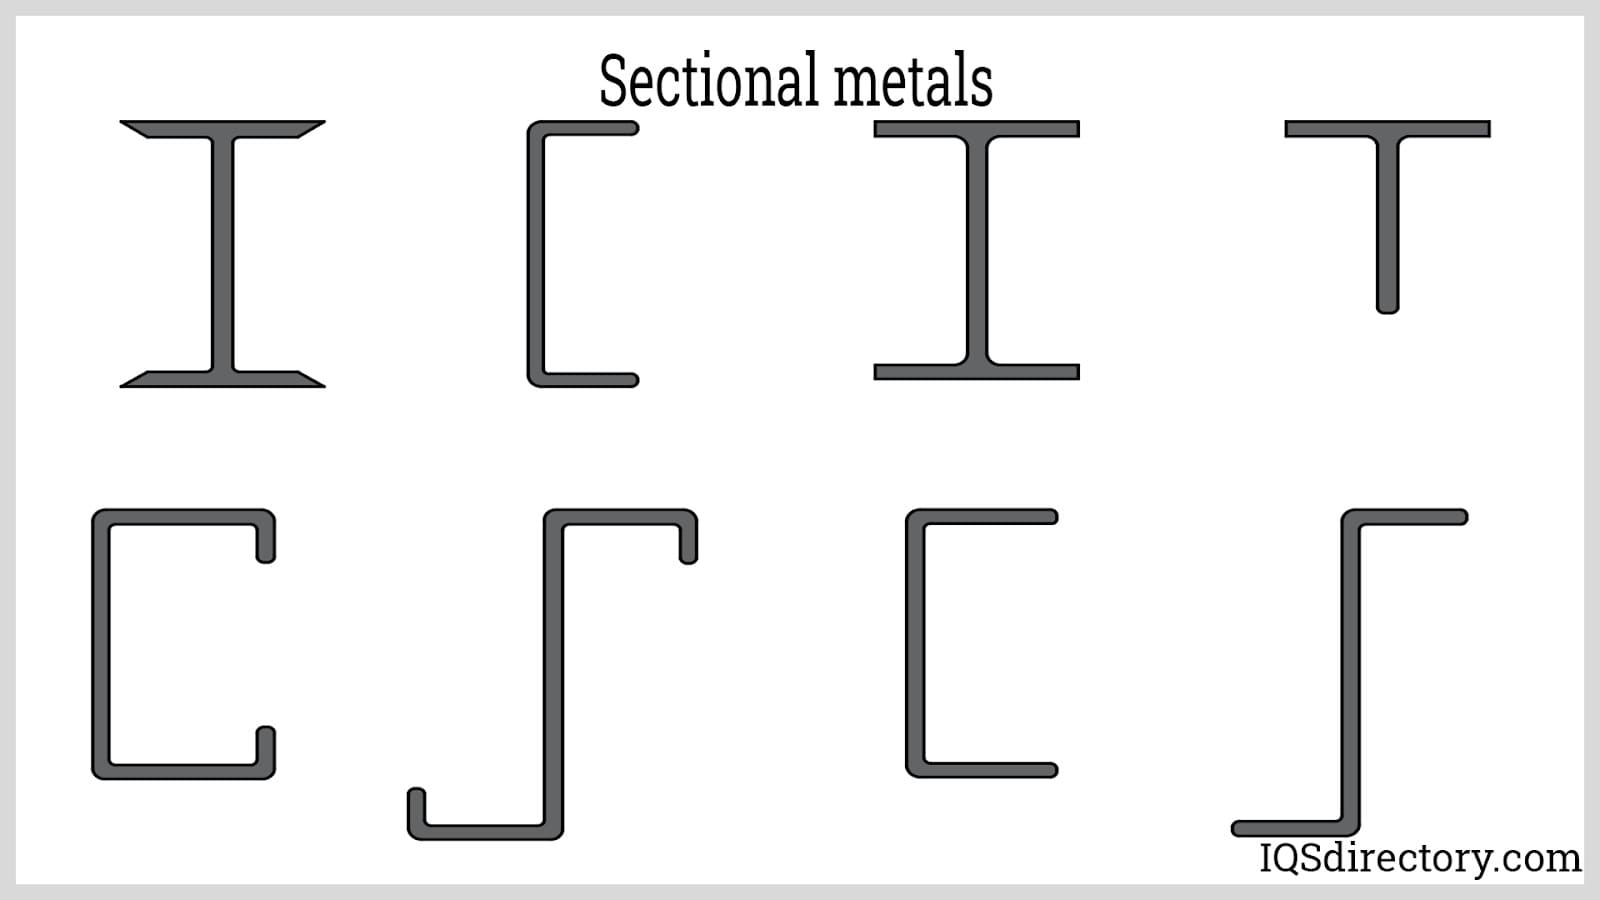 Sectional metals